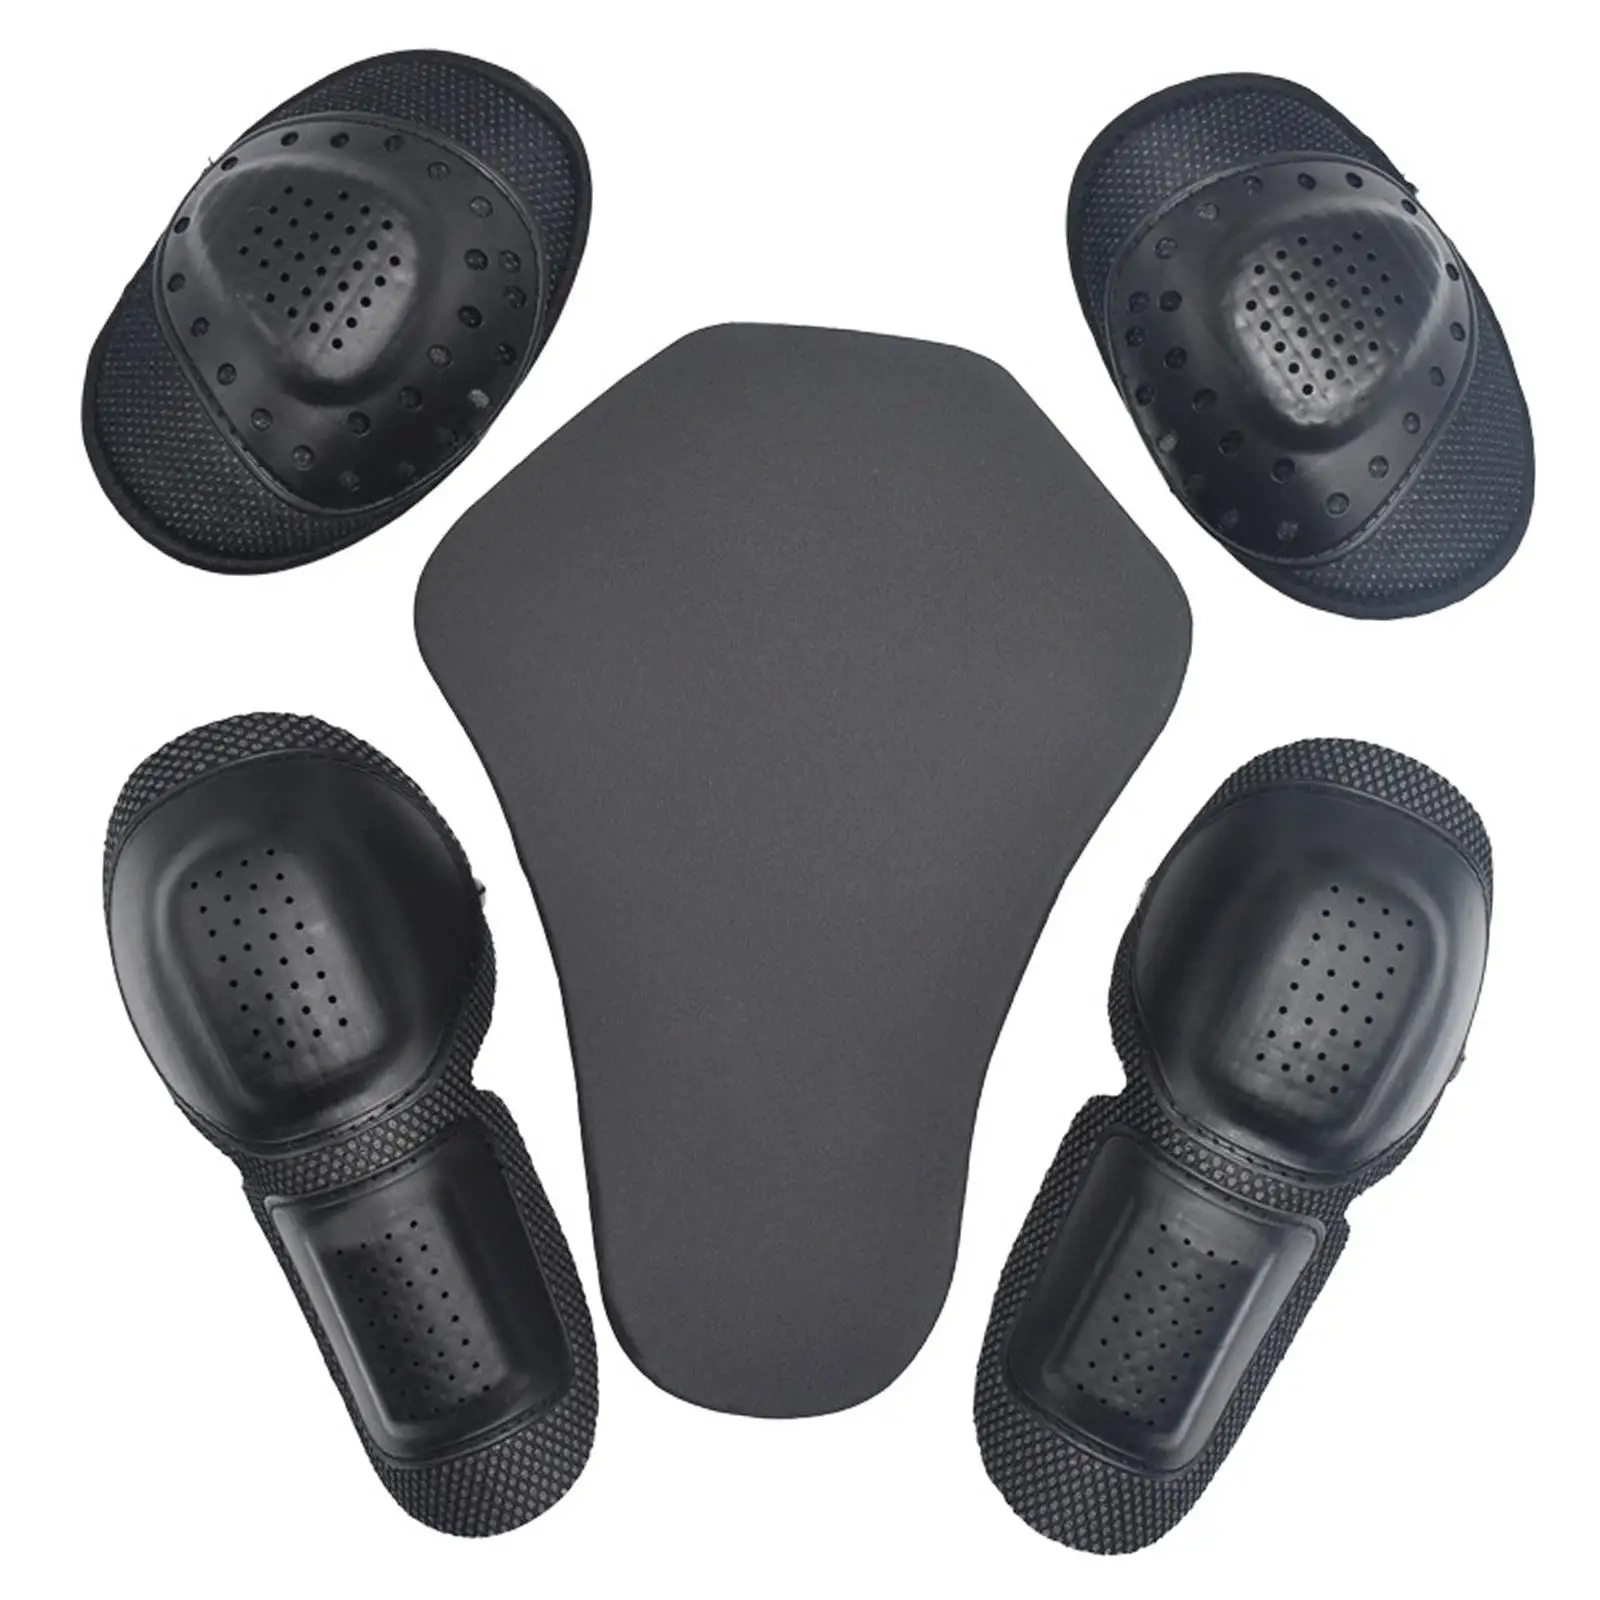 5x Riding Shoulder Protector Set Fit for Motorcycle Jackets Pants Riding